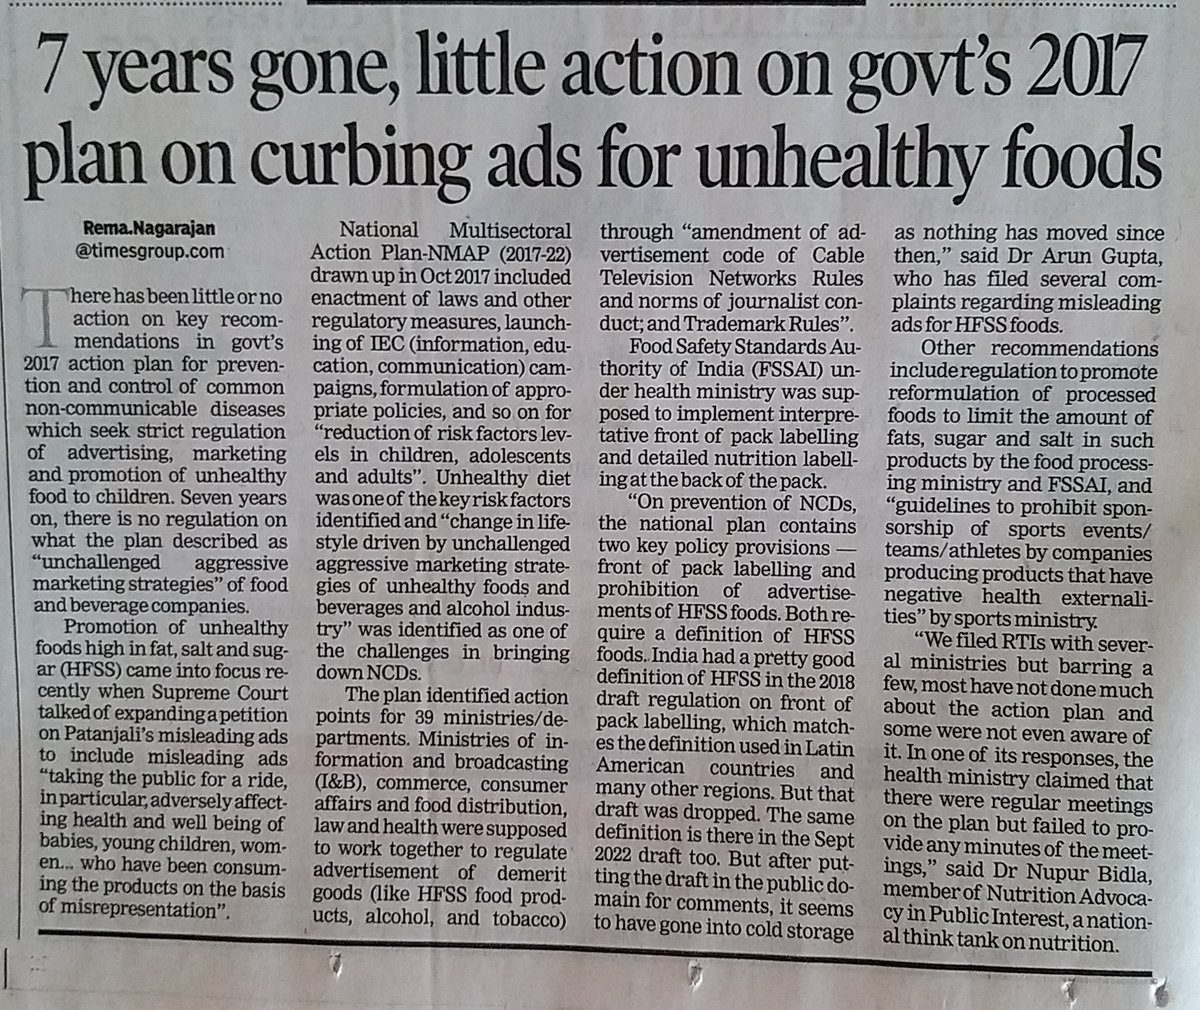 Grand sounding National Multisectoral Action Plan-NMAP (2017-22) for prevention and control of common non-communicable diseases seeks strict regulation of advertising, marketing, promotion of unhealthy food to children SEVEN yrs later it's gathering dust No law yet to curb ads